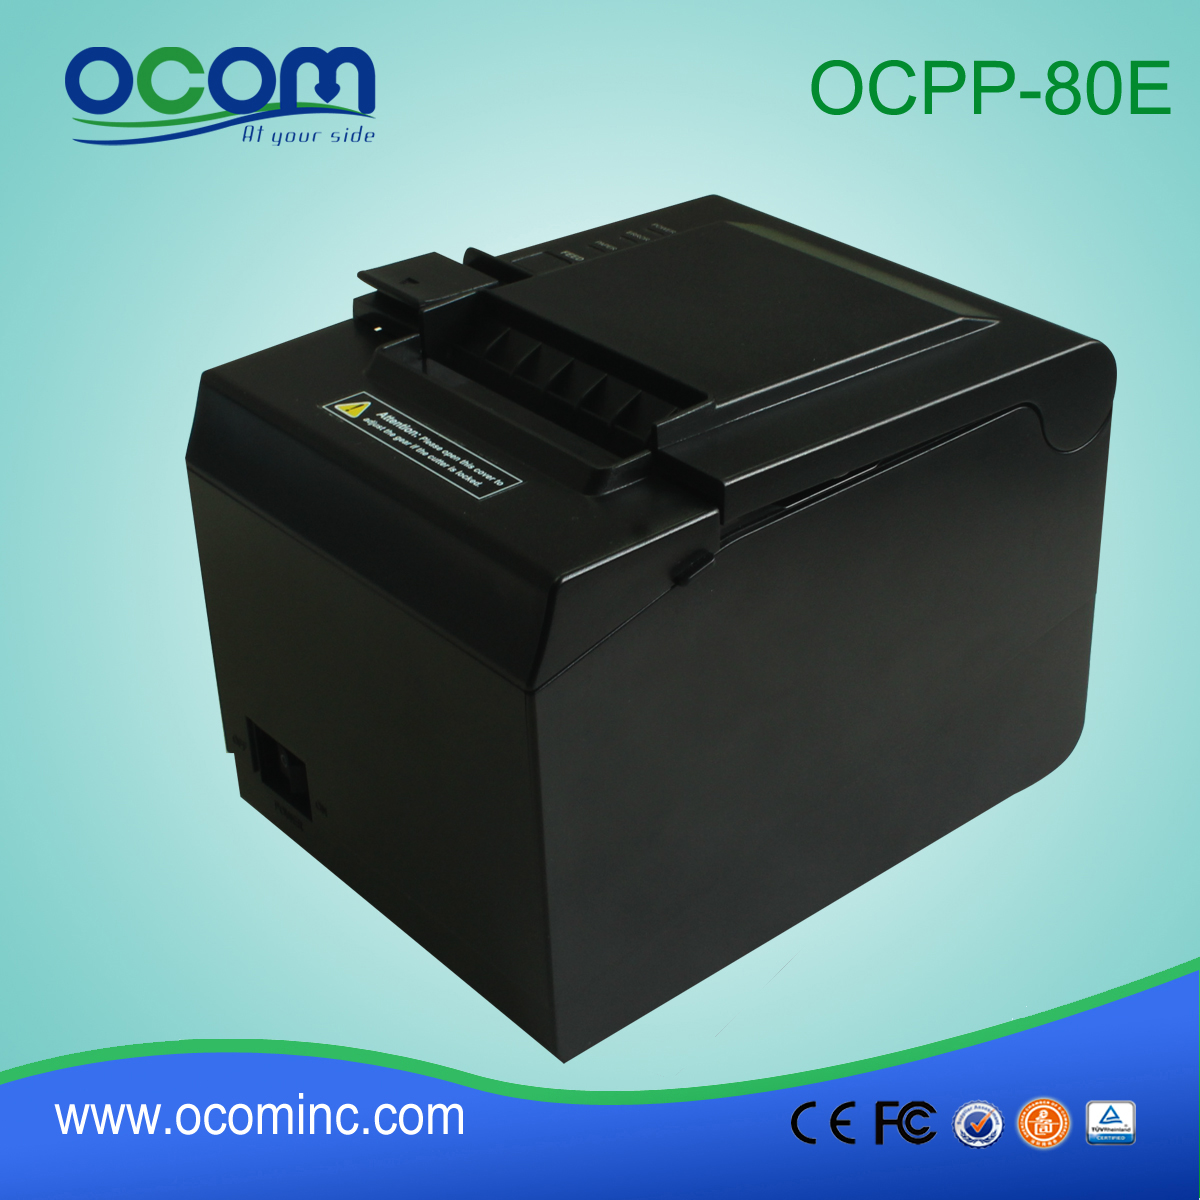 OCPP-80E-URL 80mm POS Receipt Thermal Printer With Auto Cutter For Restaurant